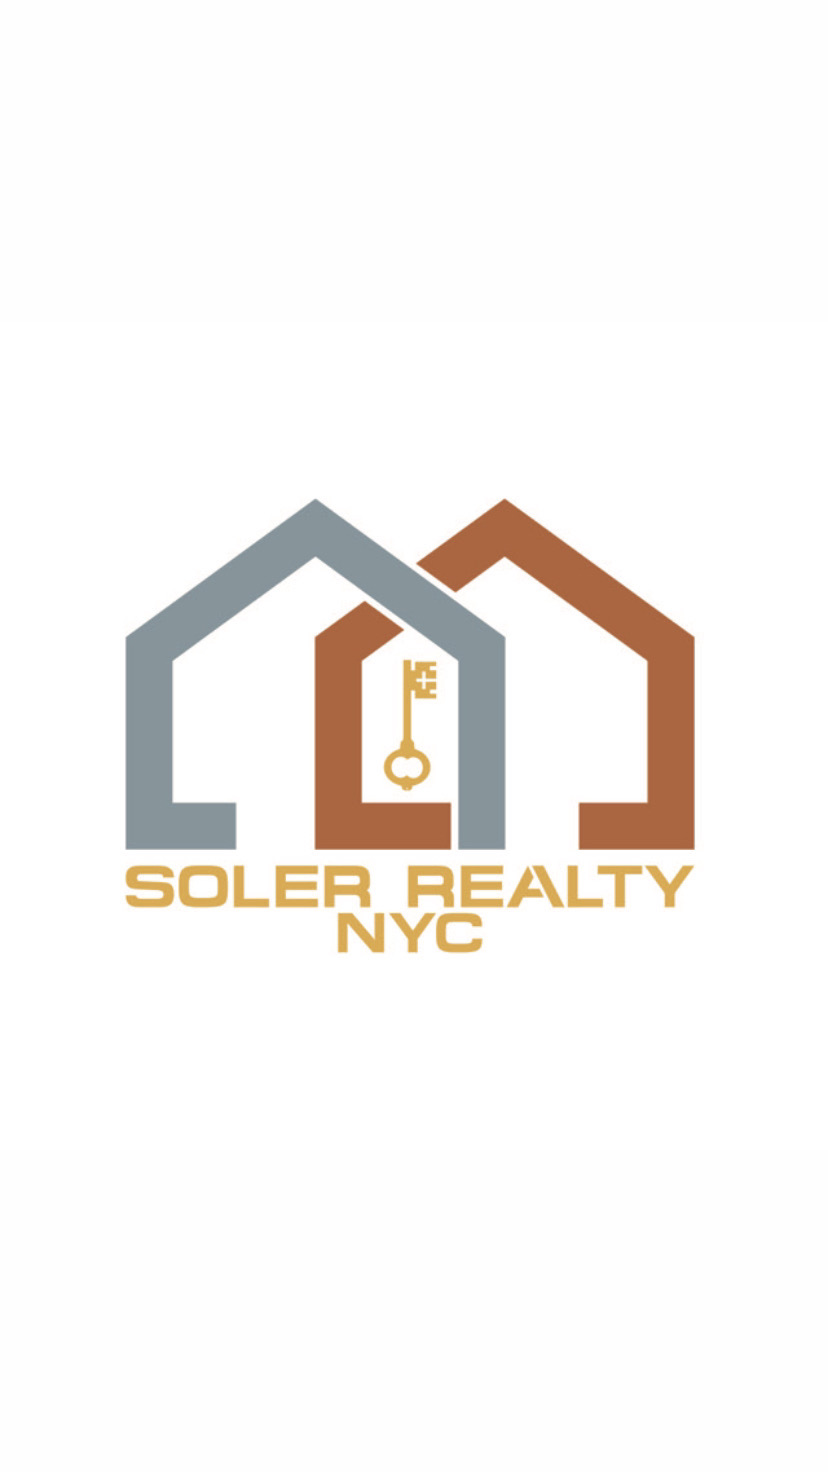 Soler Realty NYC | 47 Edgecliff Terrace, Yonkers, NY 10705 | Phone: (917) 710-3528